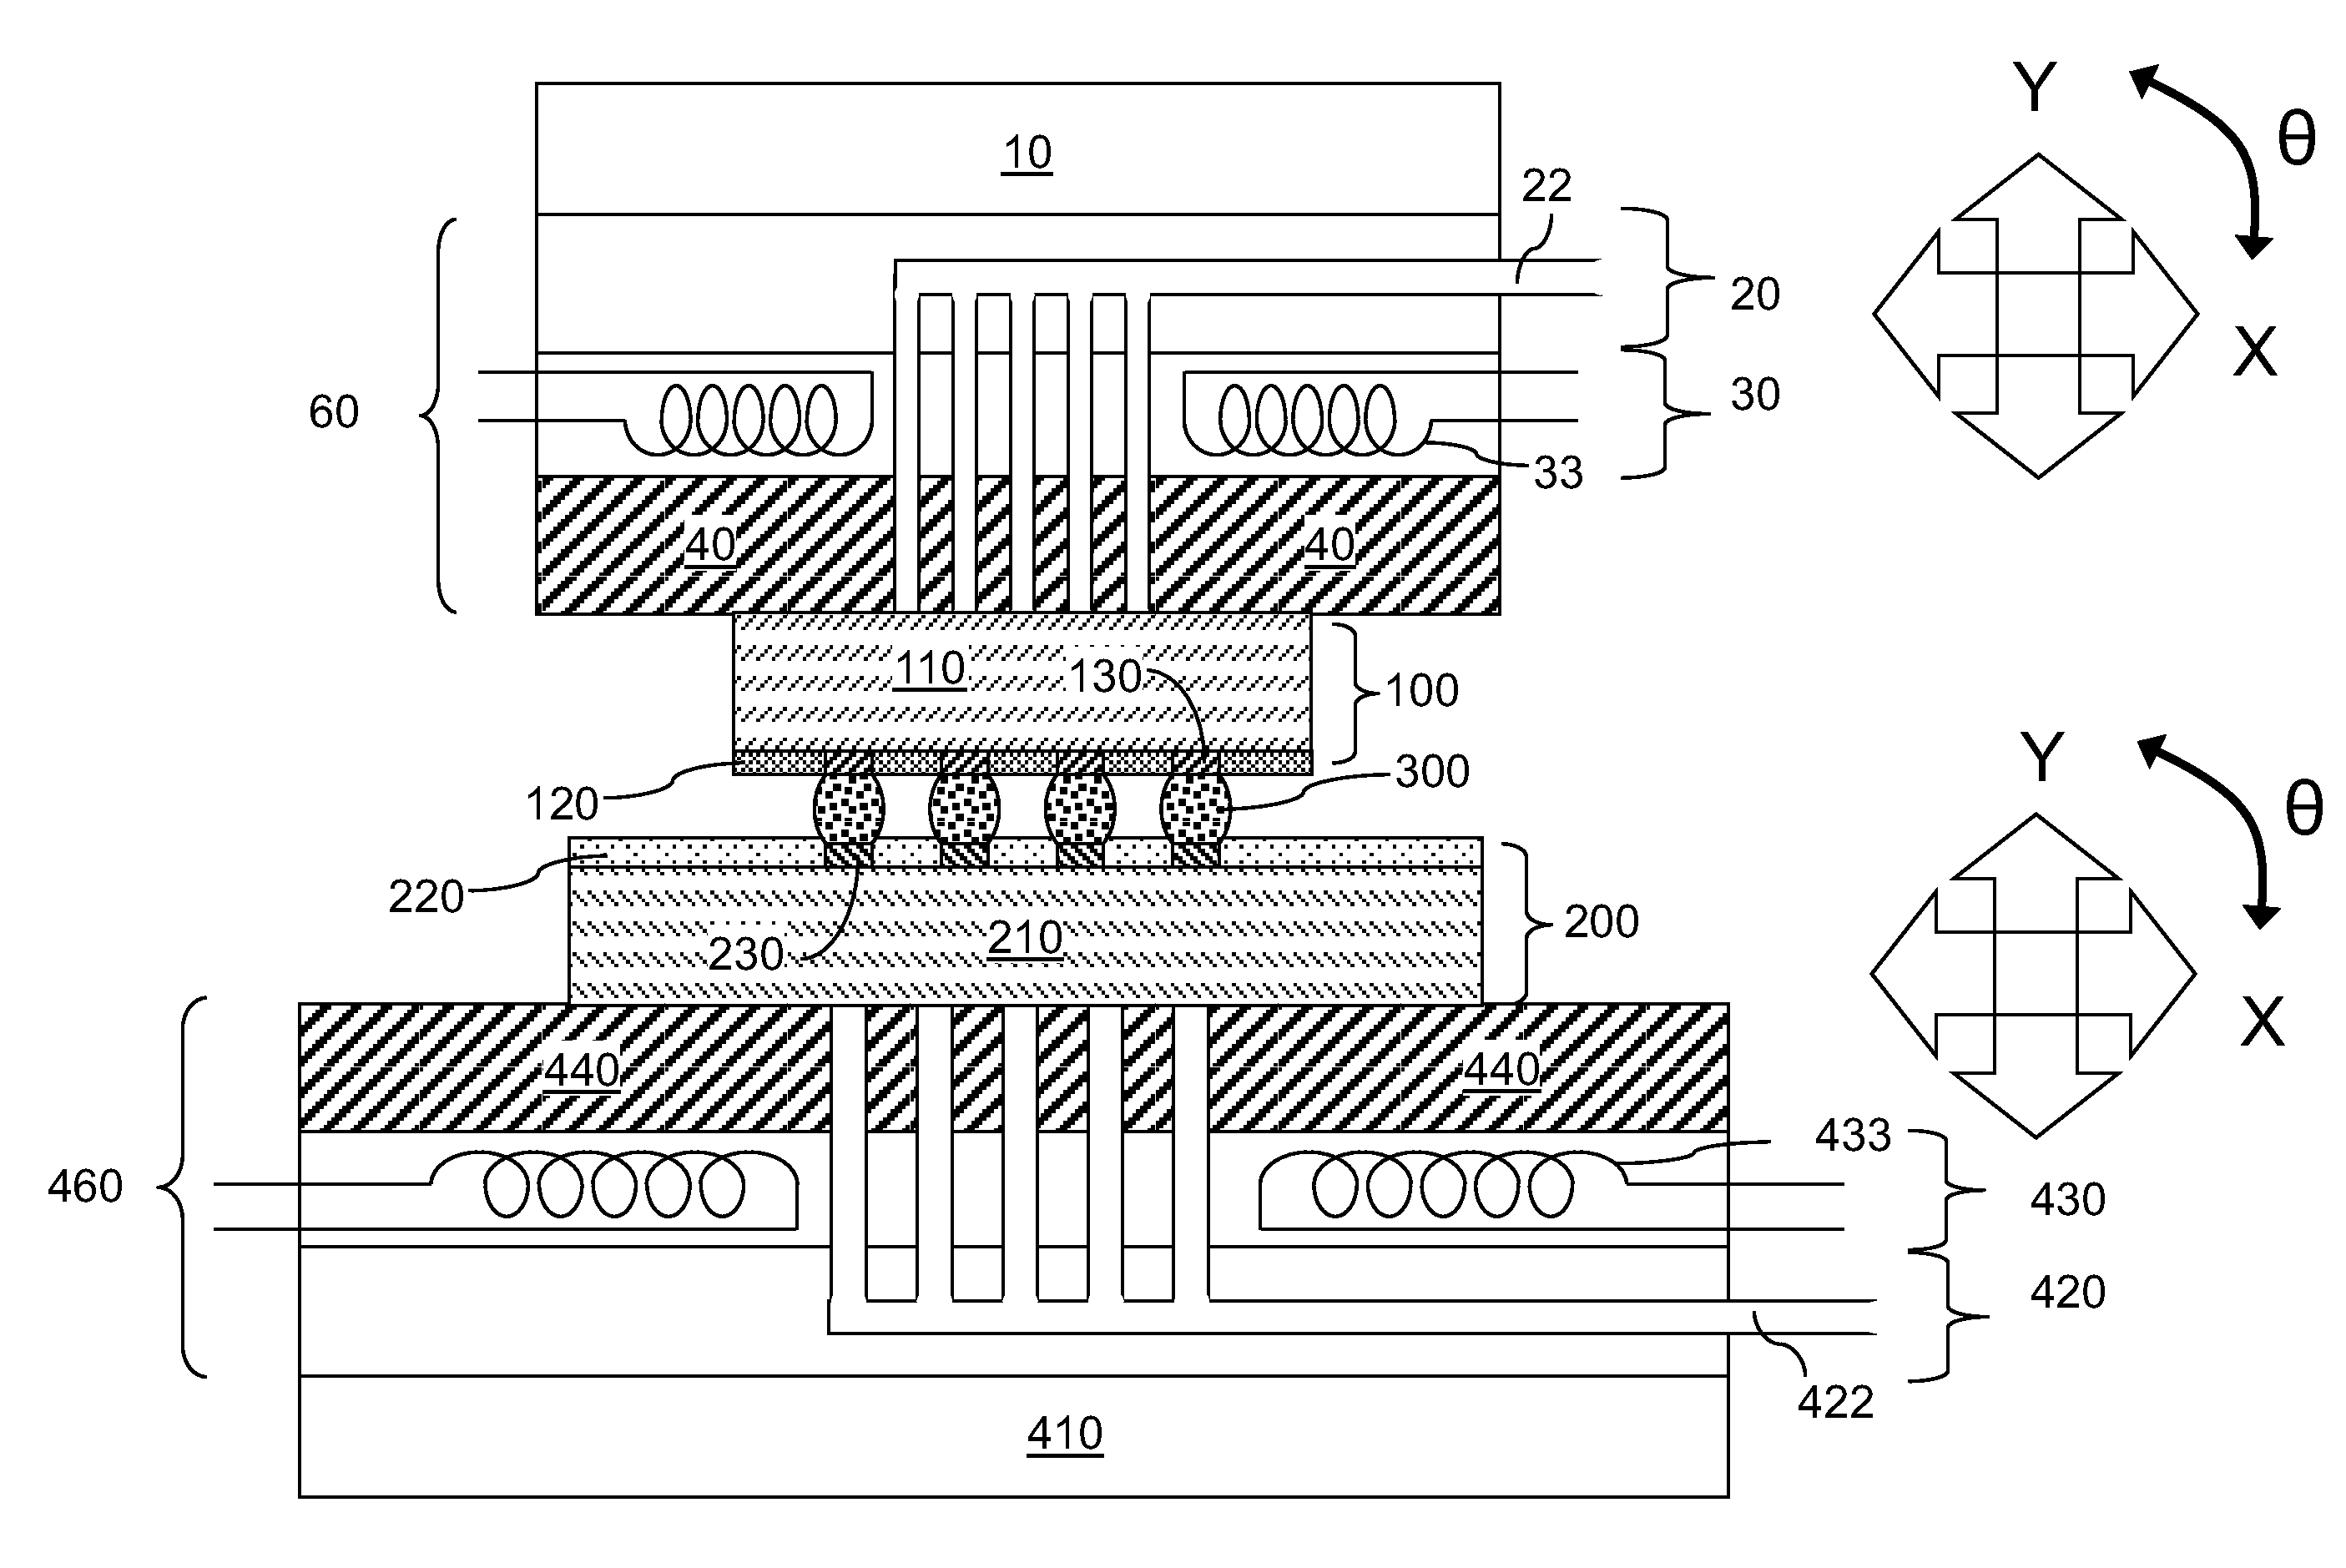 Flip chip assembly method employing post-contact differential heating